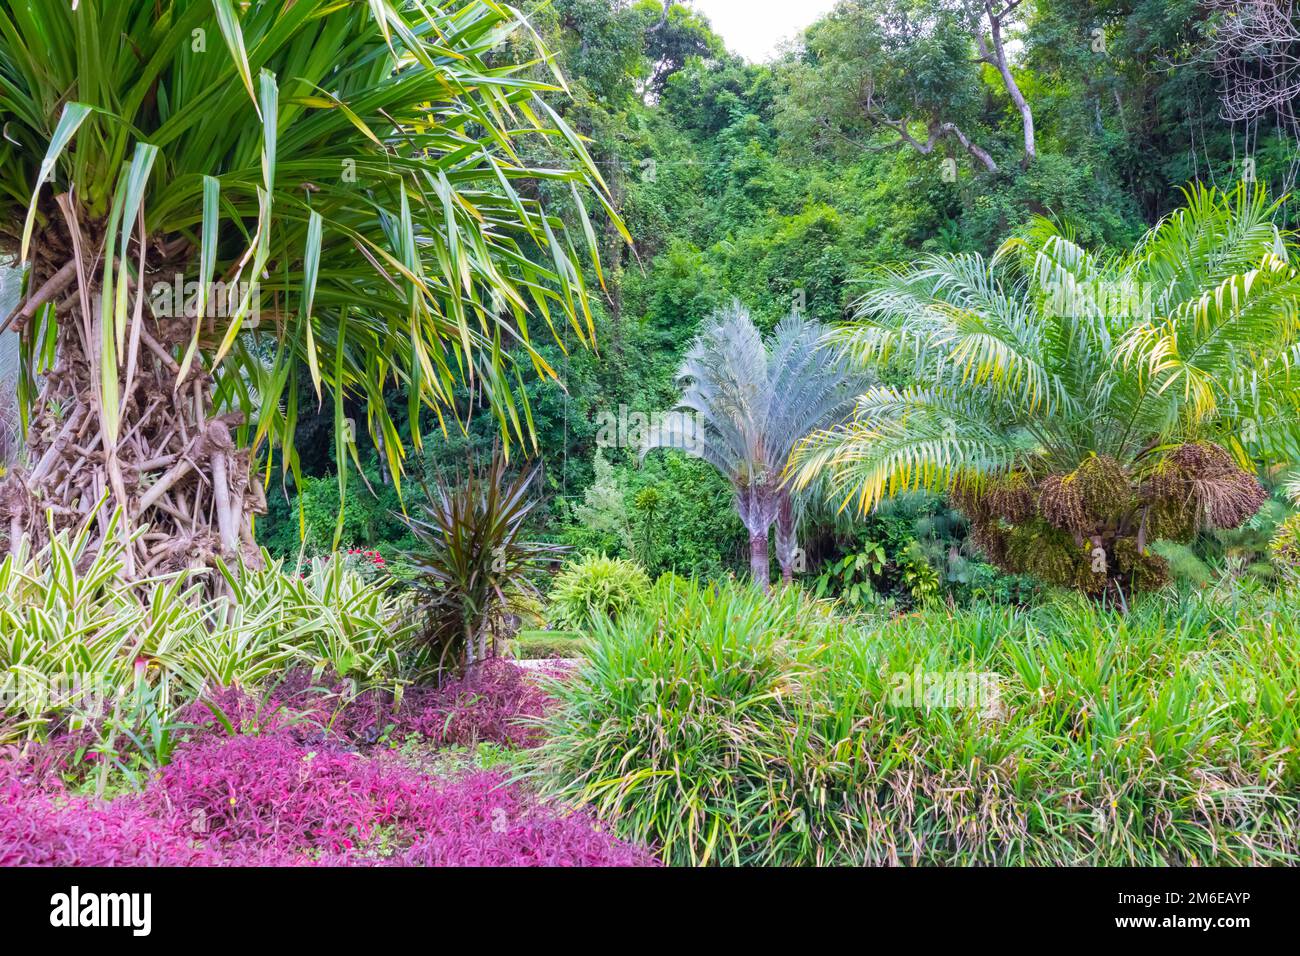 Costa Rica colorful flowers and tropical plants Stock Photo